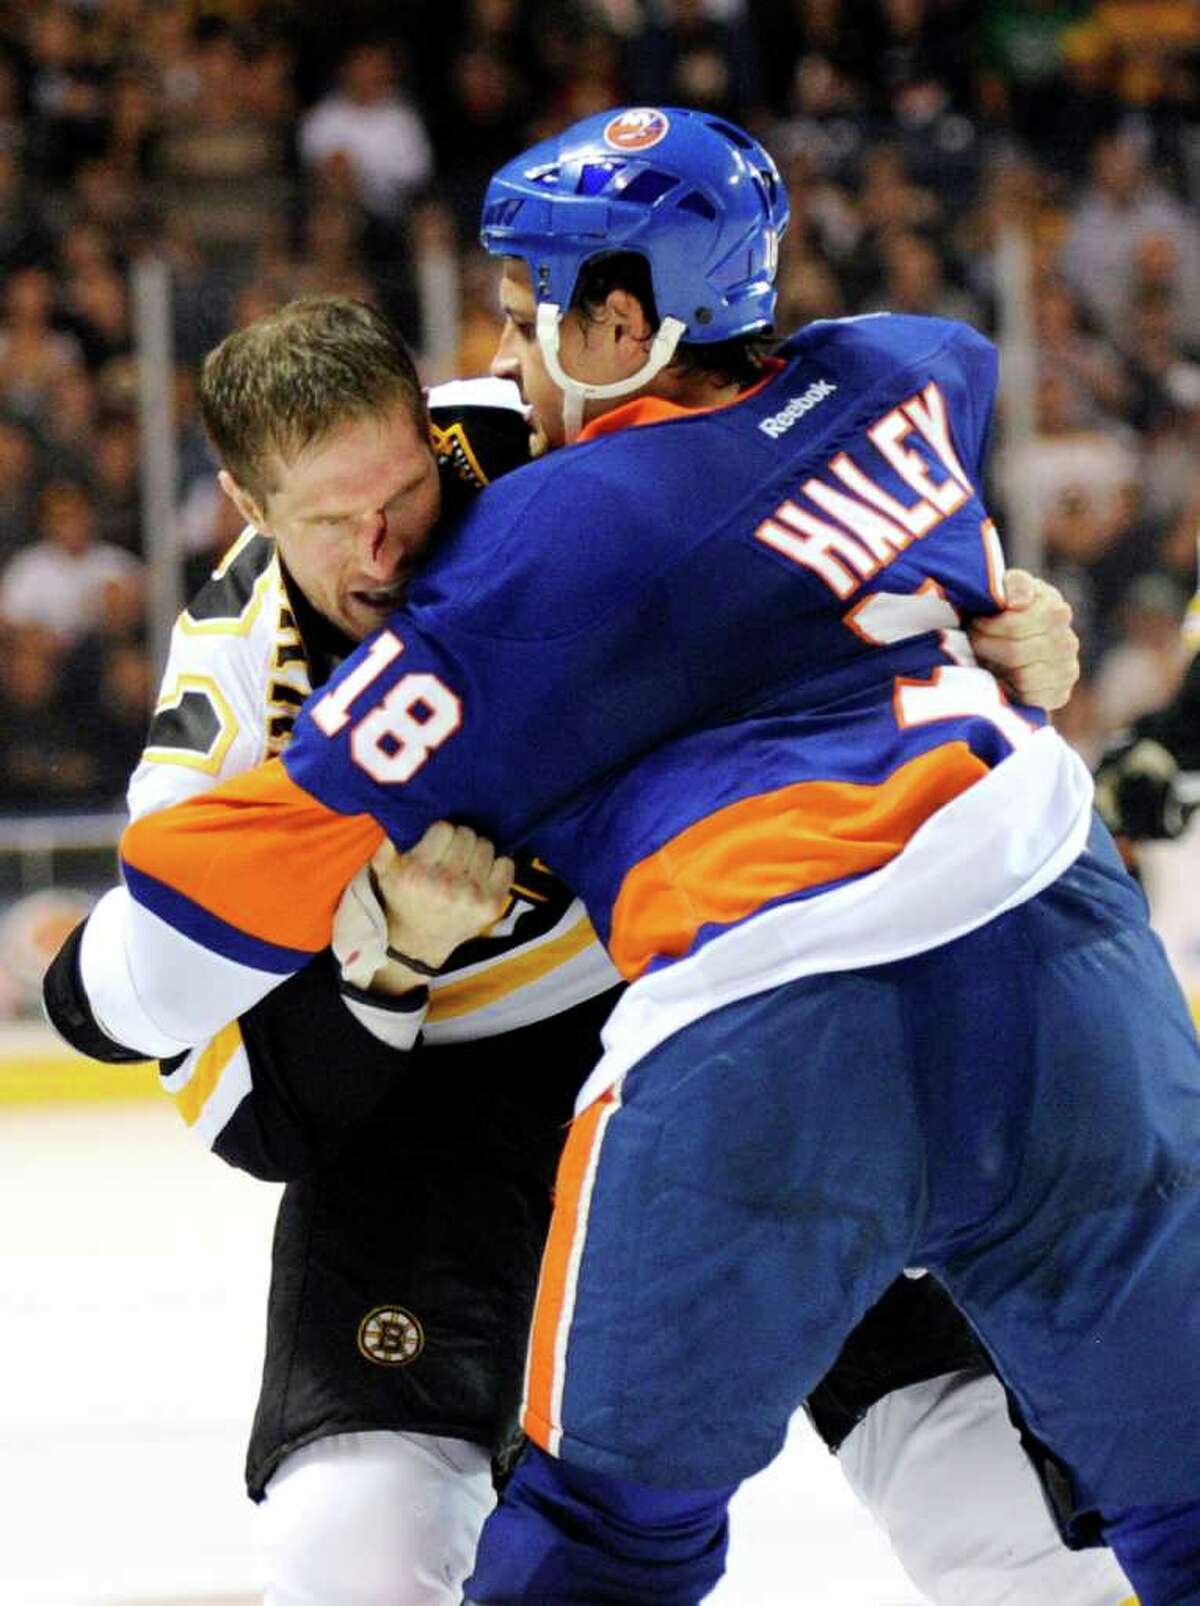 Boston Bruins' Chris Clark, left, fights with New York Islanders' Michael Haley (18) during the second period of a preseason NHL hockey game in Bridgeport, Conn., on Saturday, Oct. 1, 2011. The Bruins won the game 3-2. (AP Photo/Fred Beckham)